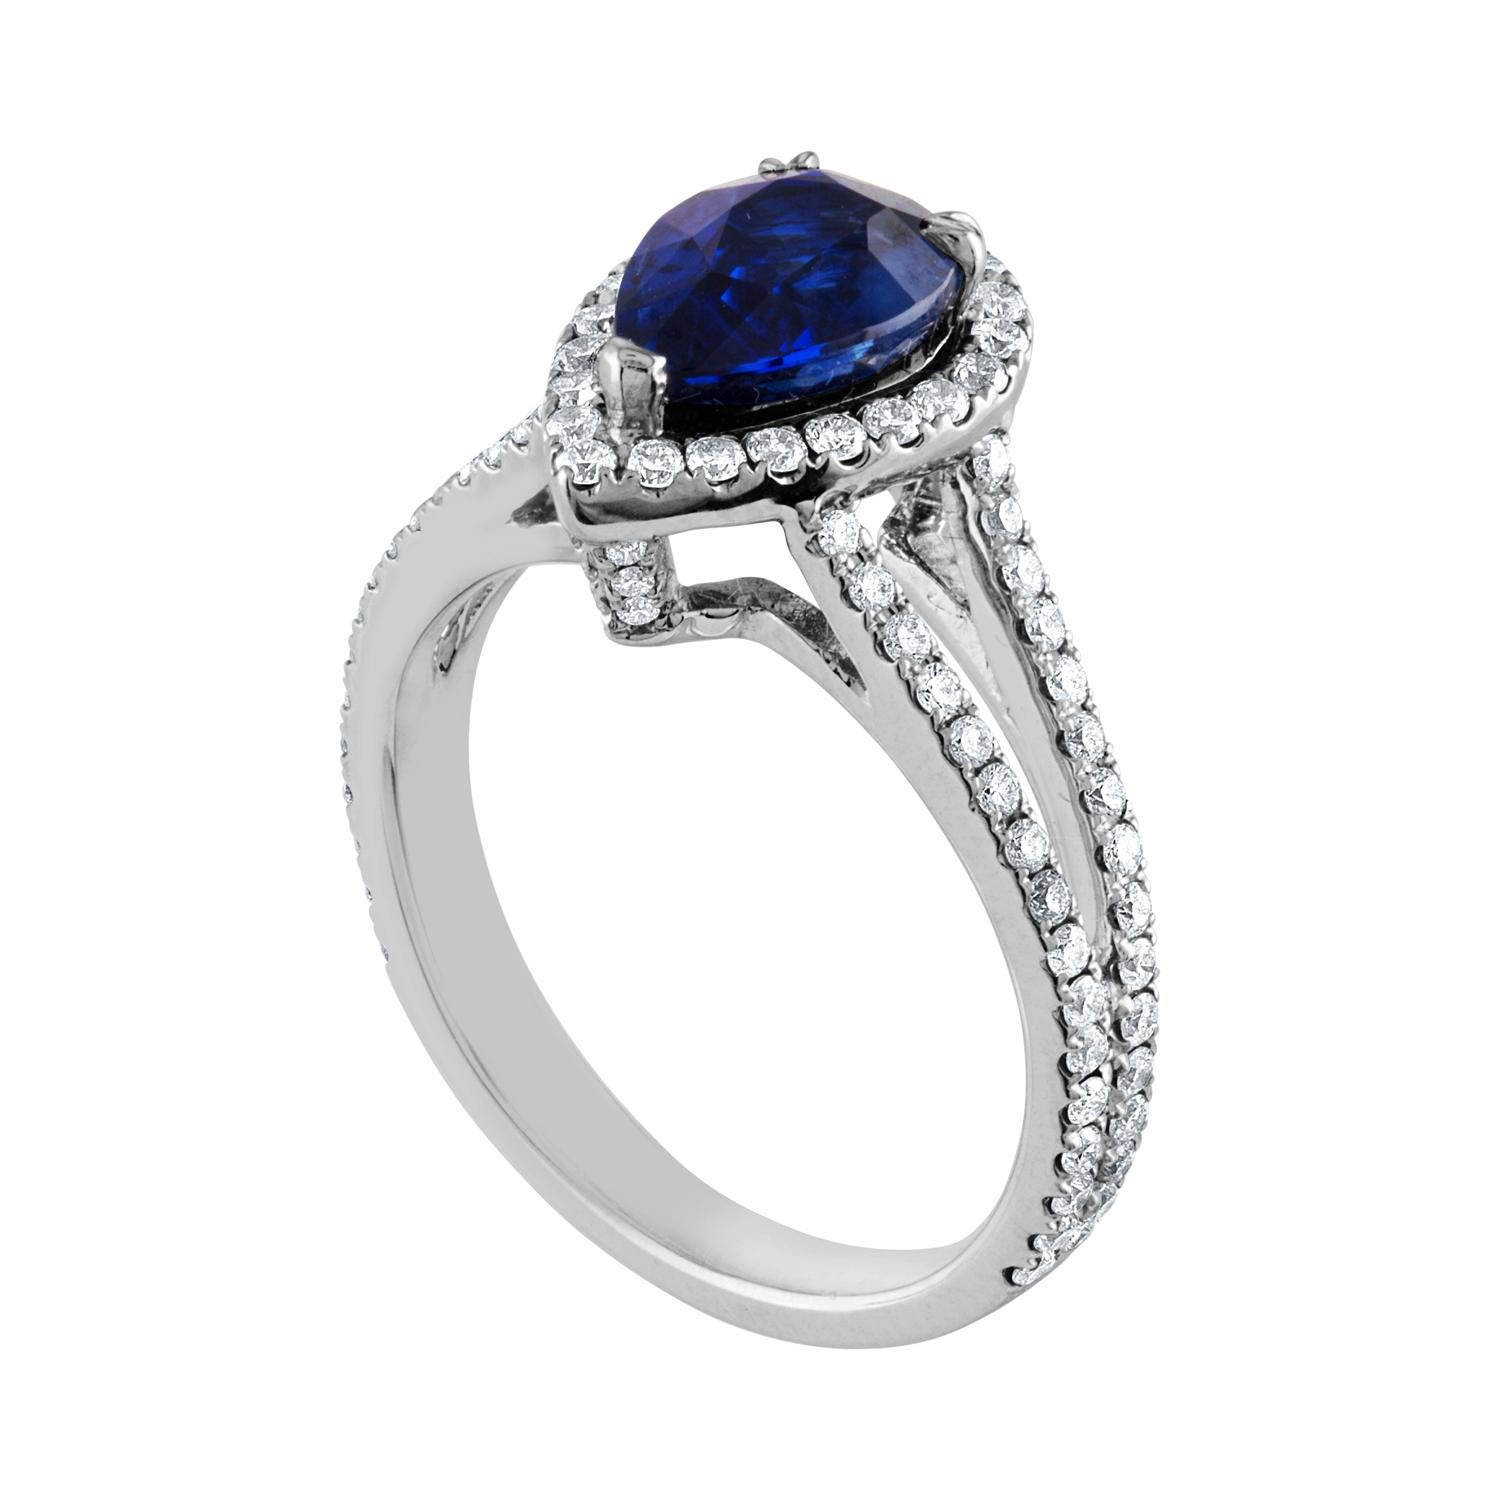 Beautiful Pear Halo Ring
The ring is 18K White Gold
The ring has 0.65 carats G SI in white diamonds.
The center stone is a pear shaped 2.02 Carat Blue Sapphire.
The Sapphire is heated and is certified by LAPIS.
The ring is a size 6.75, sizable.
The